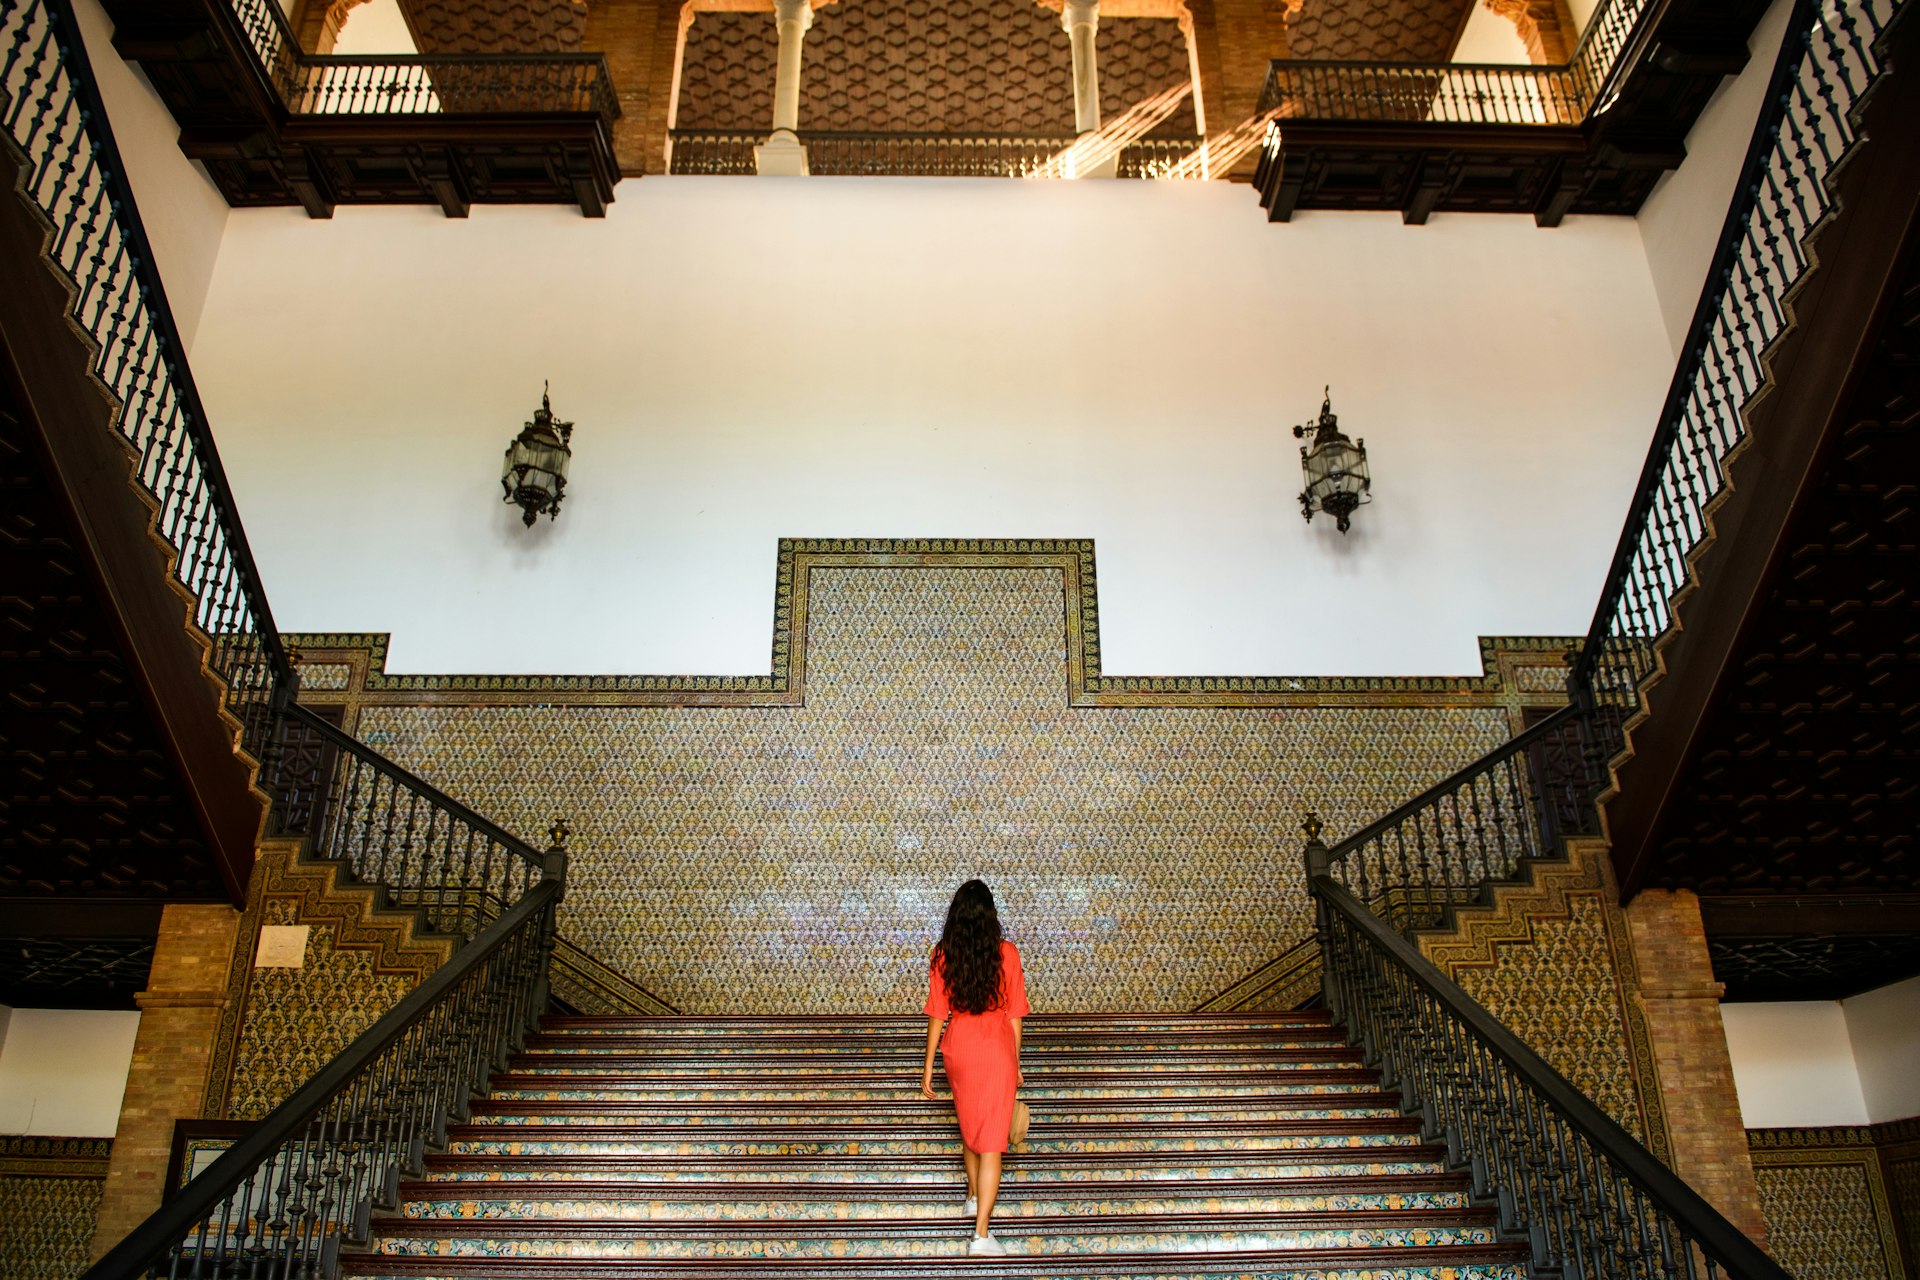 A woman walks up some steps in a building with walls covered in many tiles